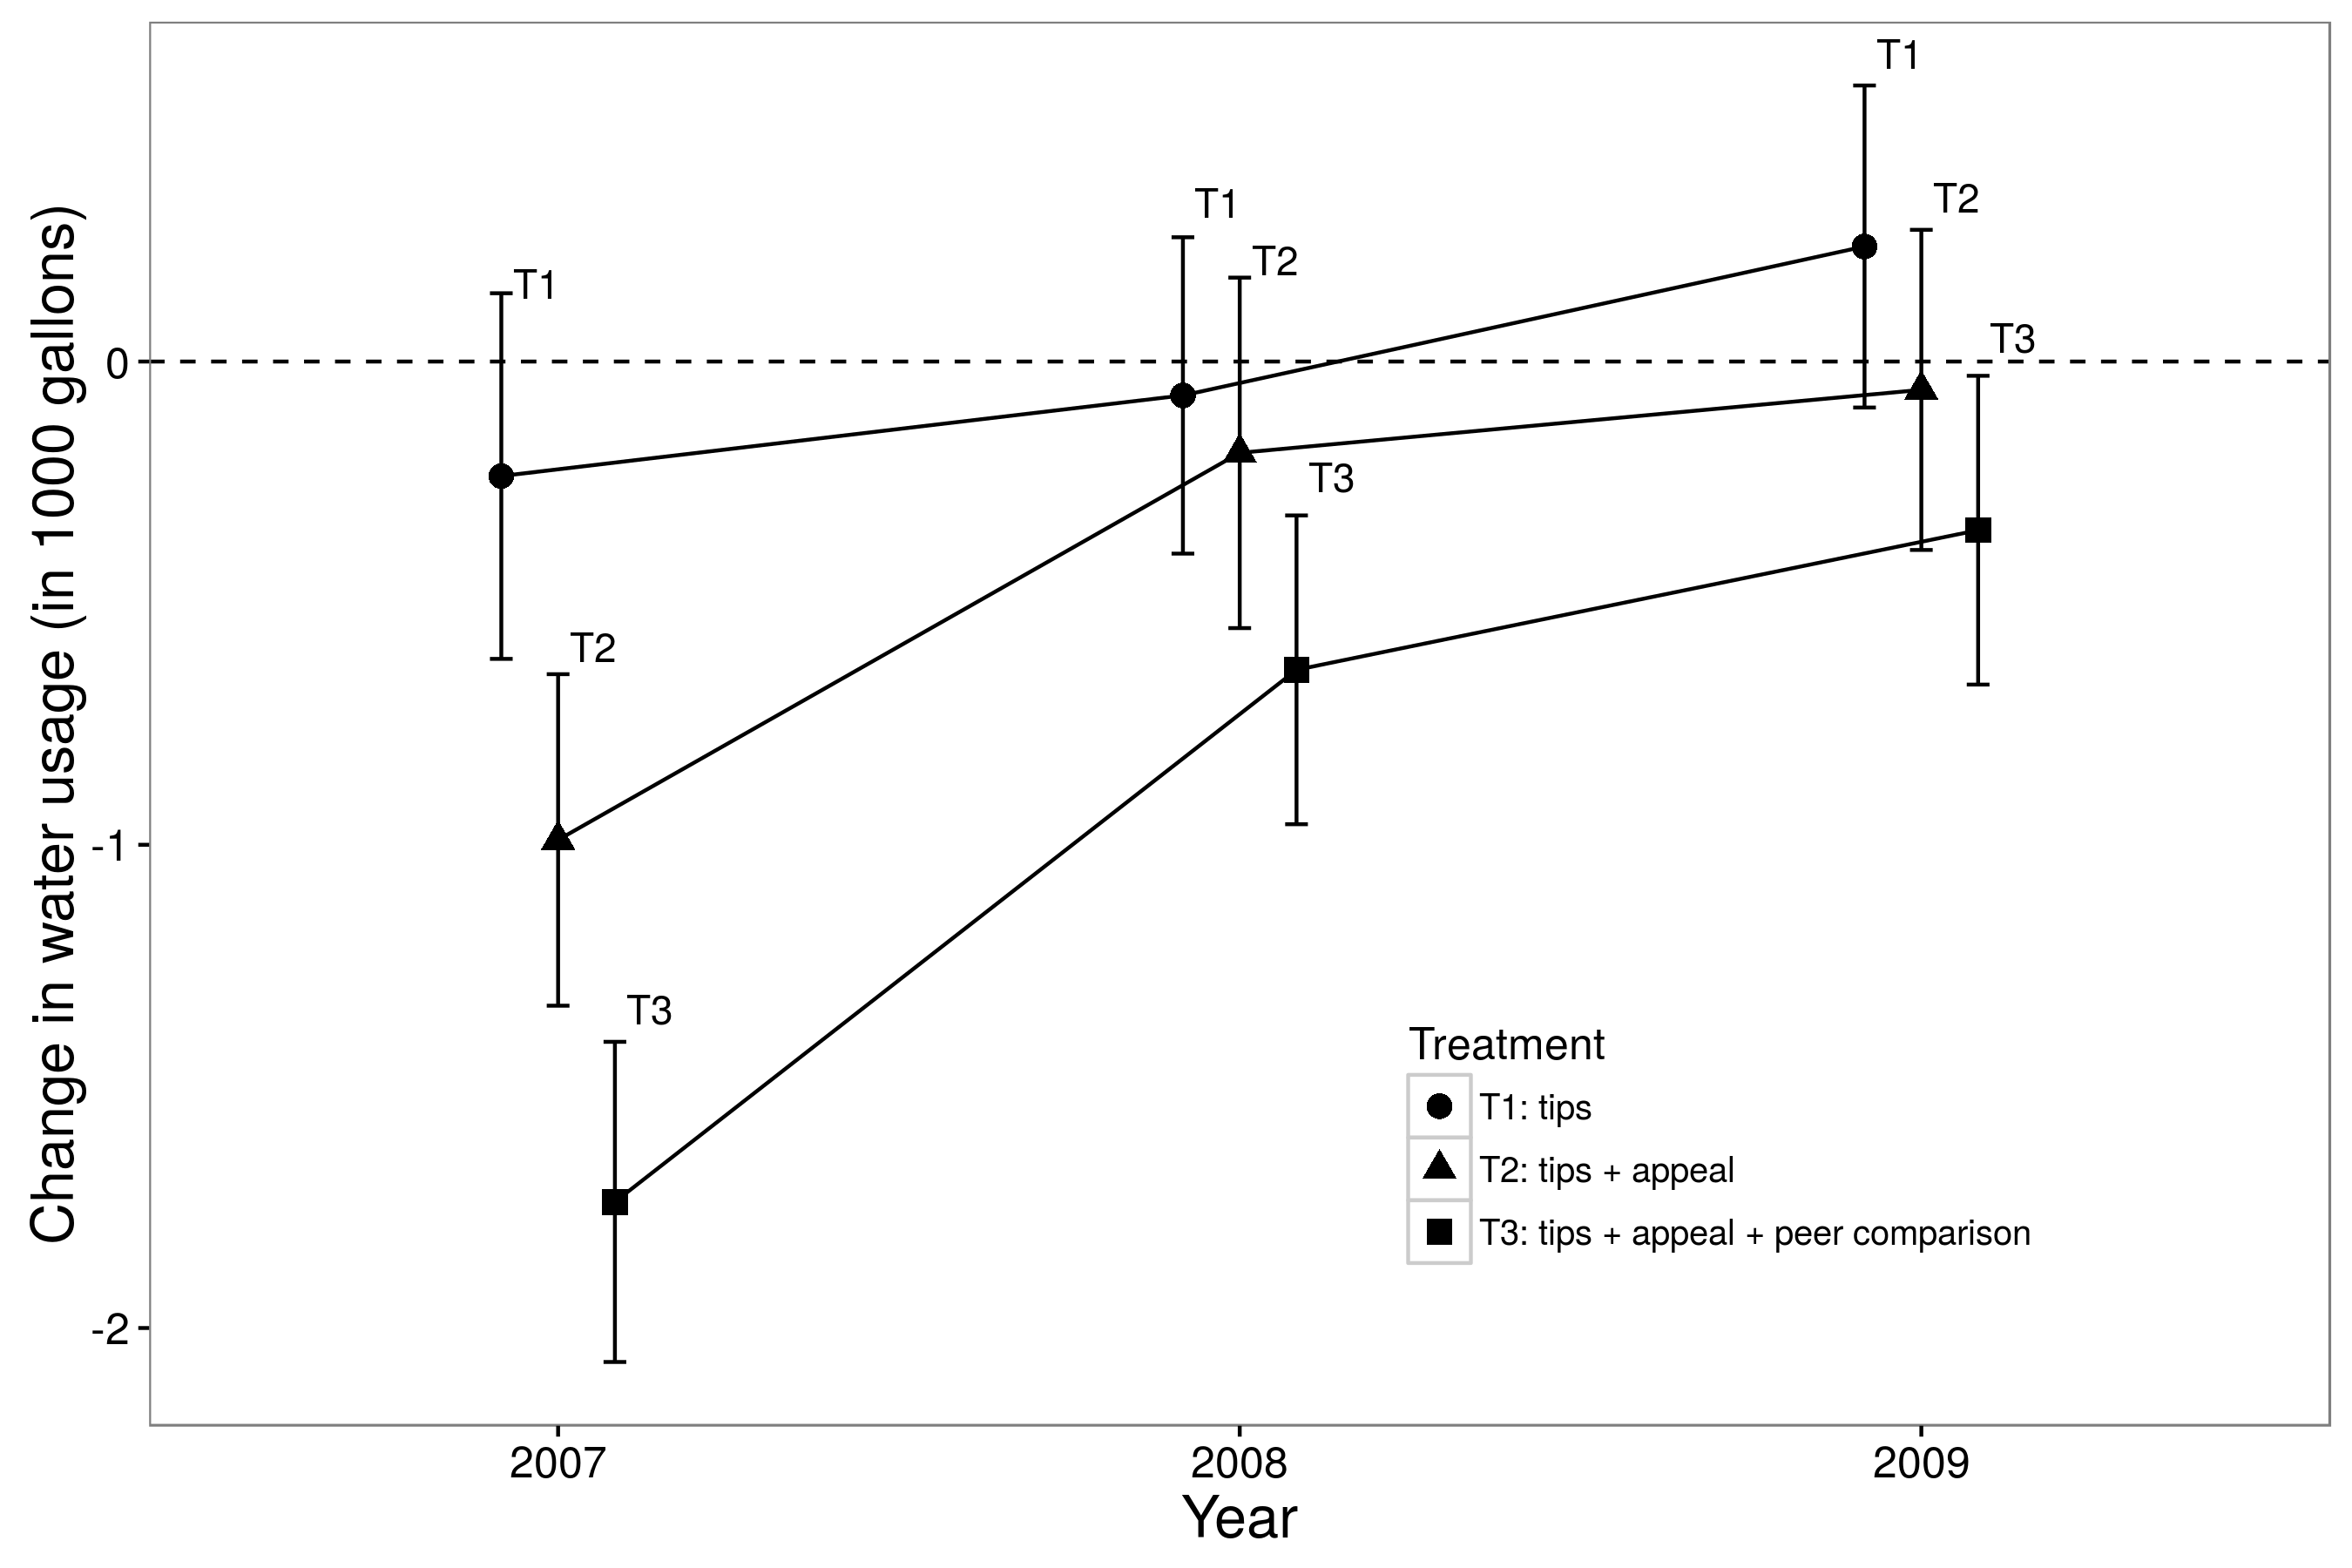 Figure 4.11: Results from Ferraro, Miranda, and Price (2011). Treatments were sent May 21, 2007, and effects were measured during the summers of 2007, 2008, and 2009. By unbundling the treatment, the researchers hoped to develop a better sense of the mechanisms. The tips-only treatment had essentially no effect in the short (one year), medium (two years), and long (three years) term. The tips plus appeal treatment caused participants to decrease water usage, but only in the short term. The advice plus appeal plus peer information treatment caused participants to decrease water usage in the short, medium, and long term. Vertical bars are estimated confidence intervals. See Bernedo, Ferraro, and Price (2014) for actual study materials. Adapted from Ferraro, Miranda, and Price (2011), table 1.